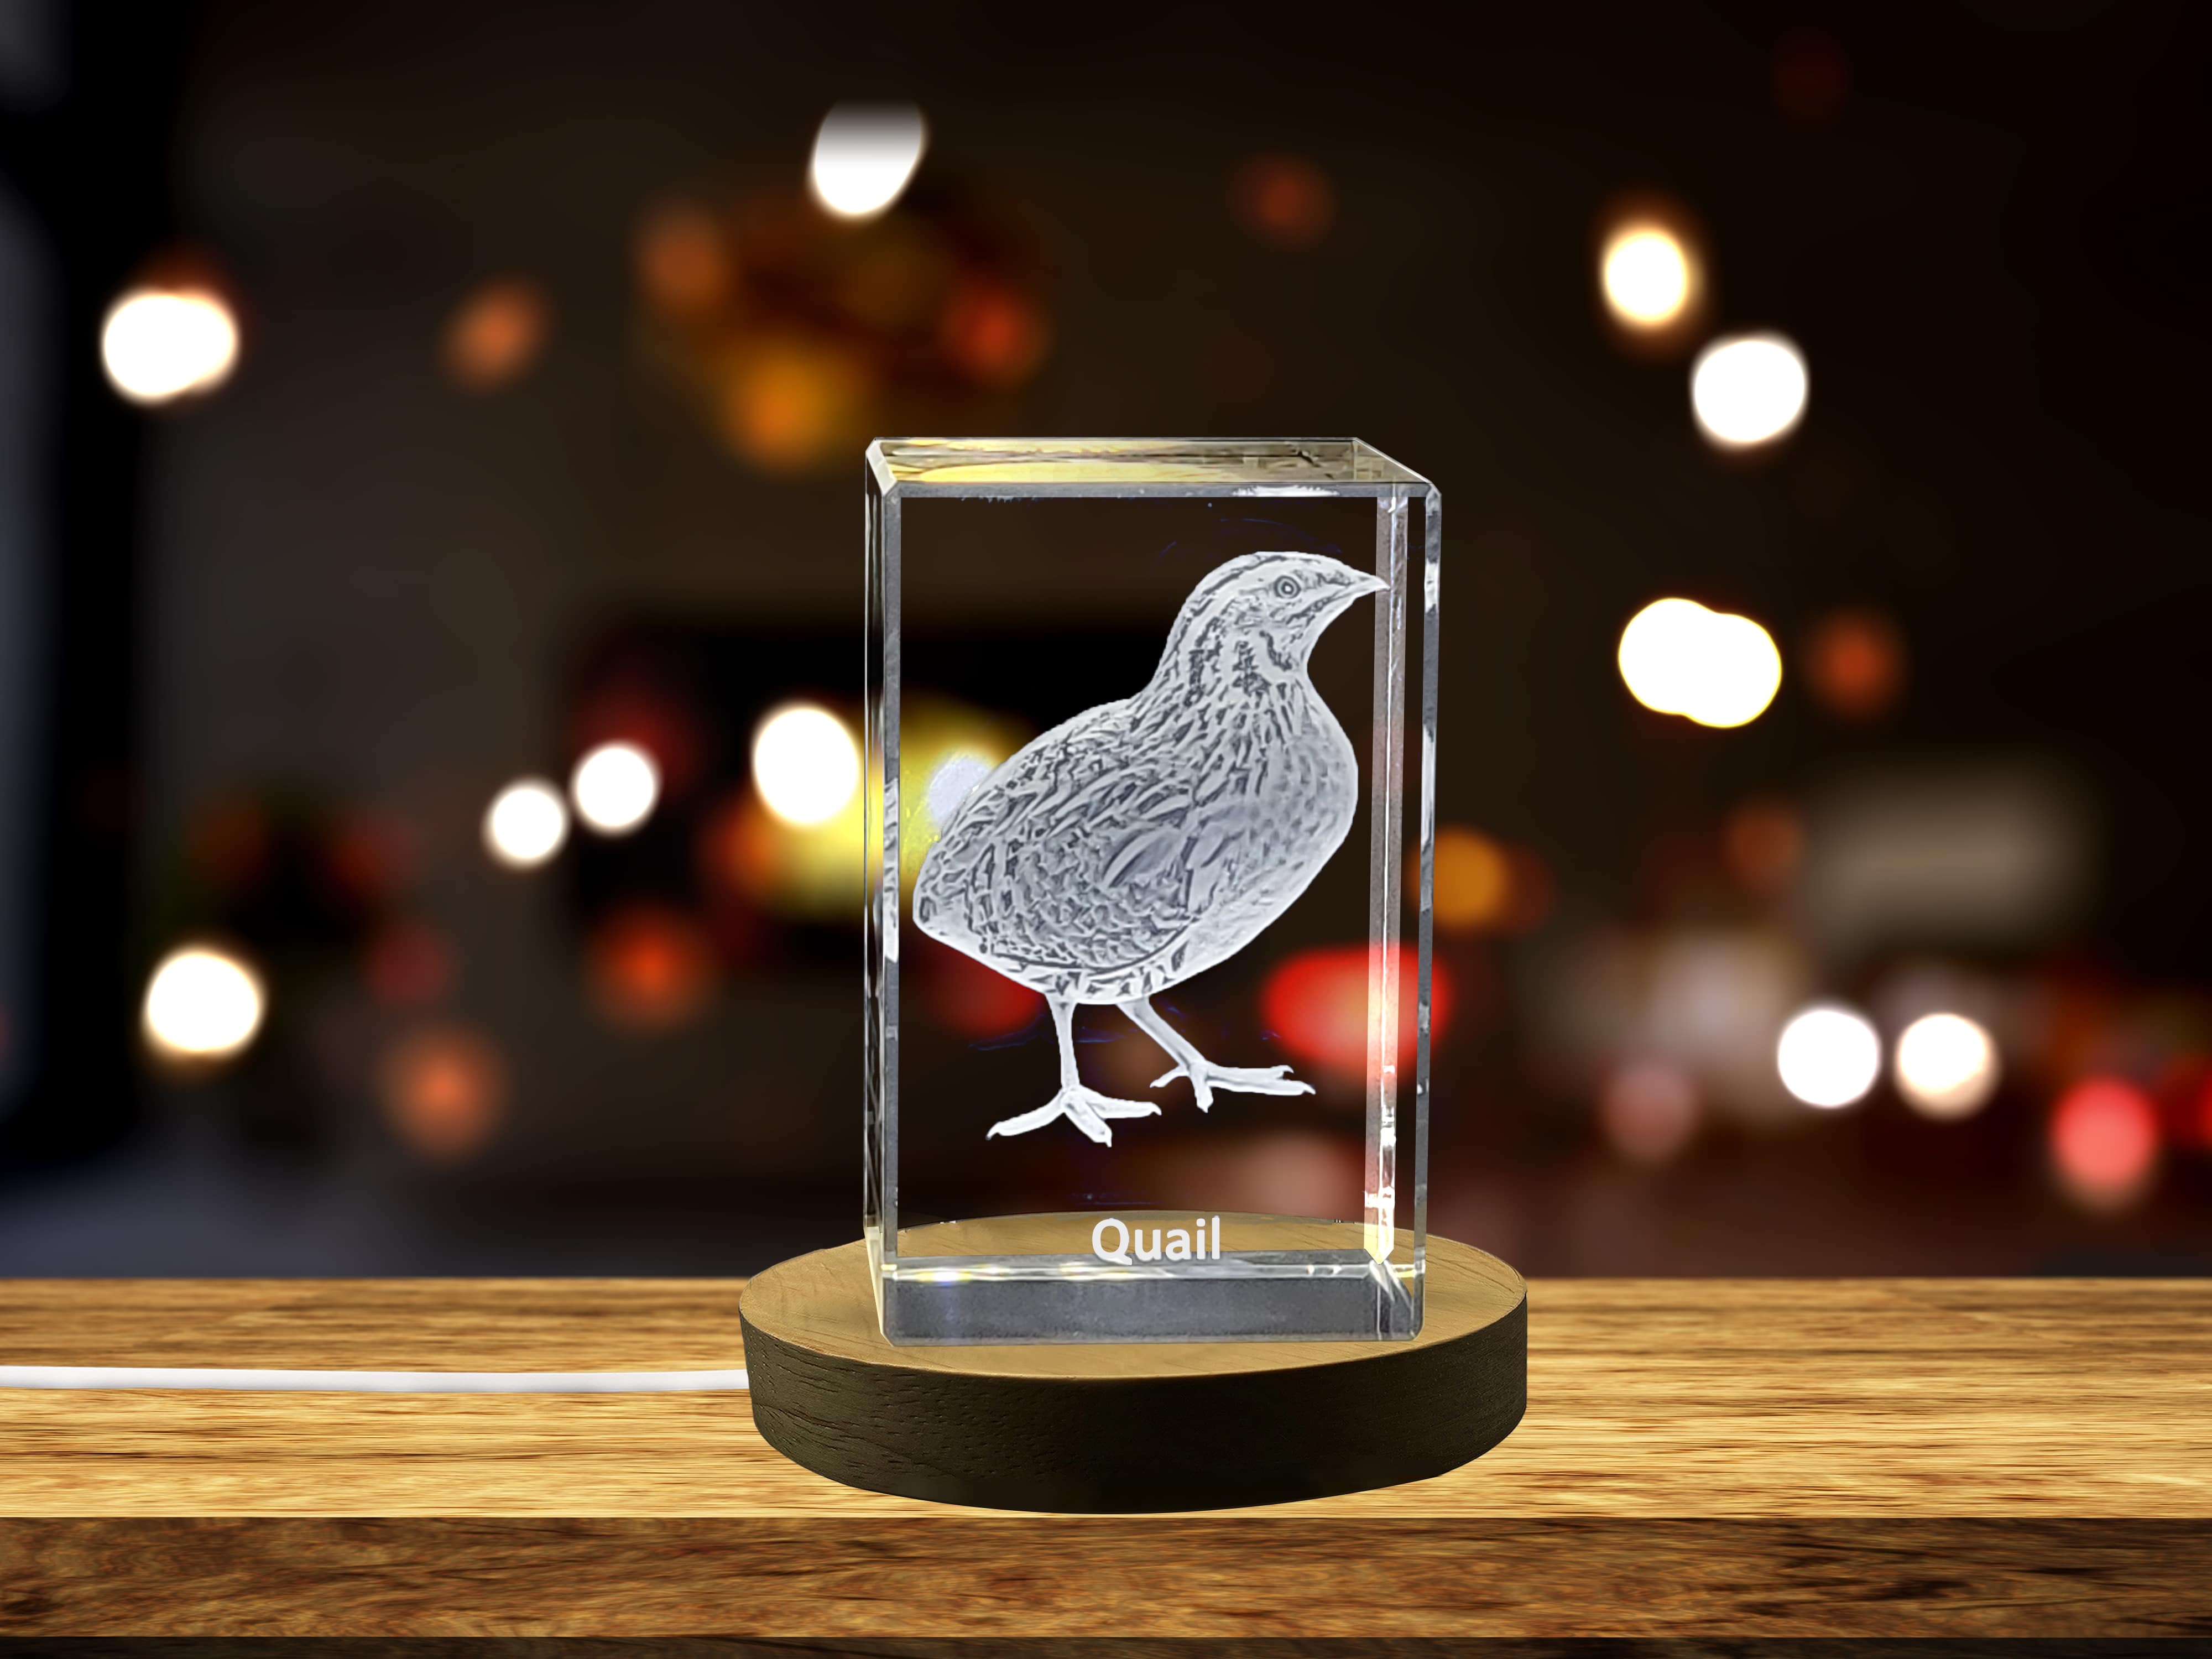 Exquisitely Engraved Pair of Quail | 3D Engraved Crystal A&B Crystal Collection